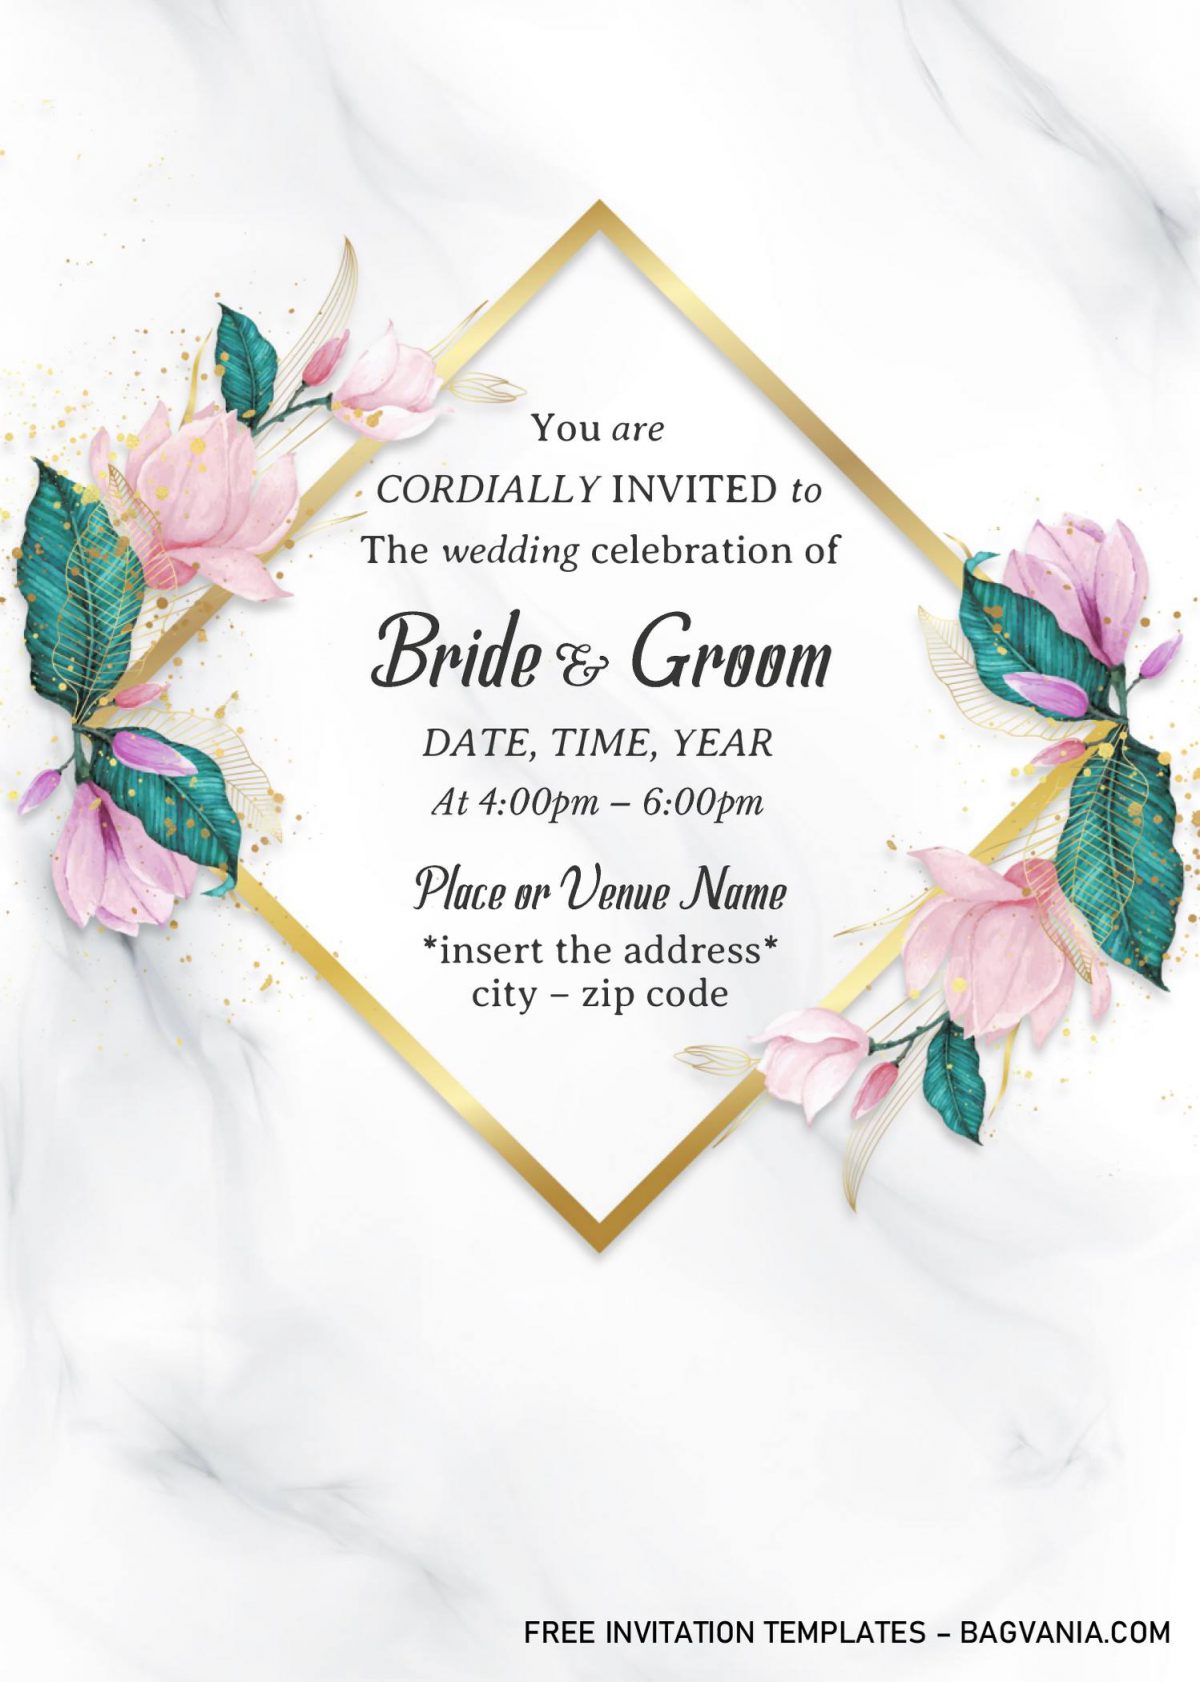 Gold Frame Floral Wedding Invitation Templates - Editable With MS Word and has white marble background